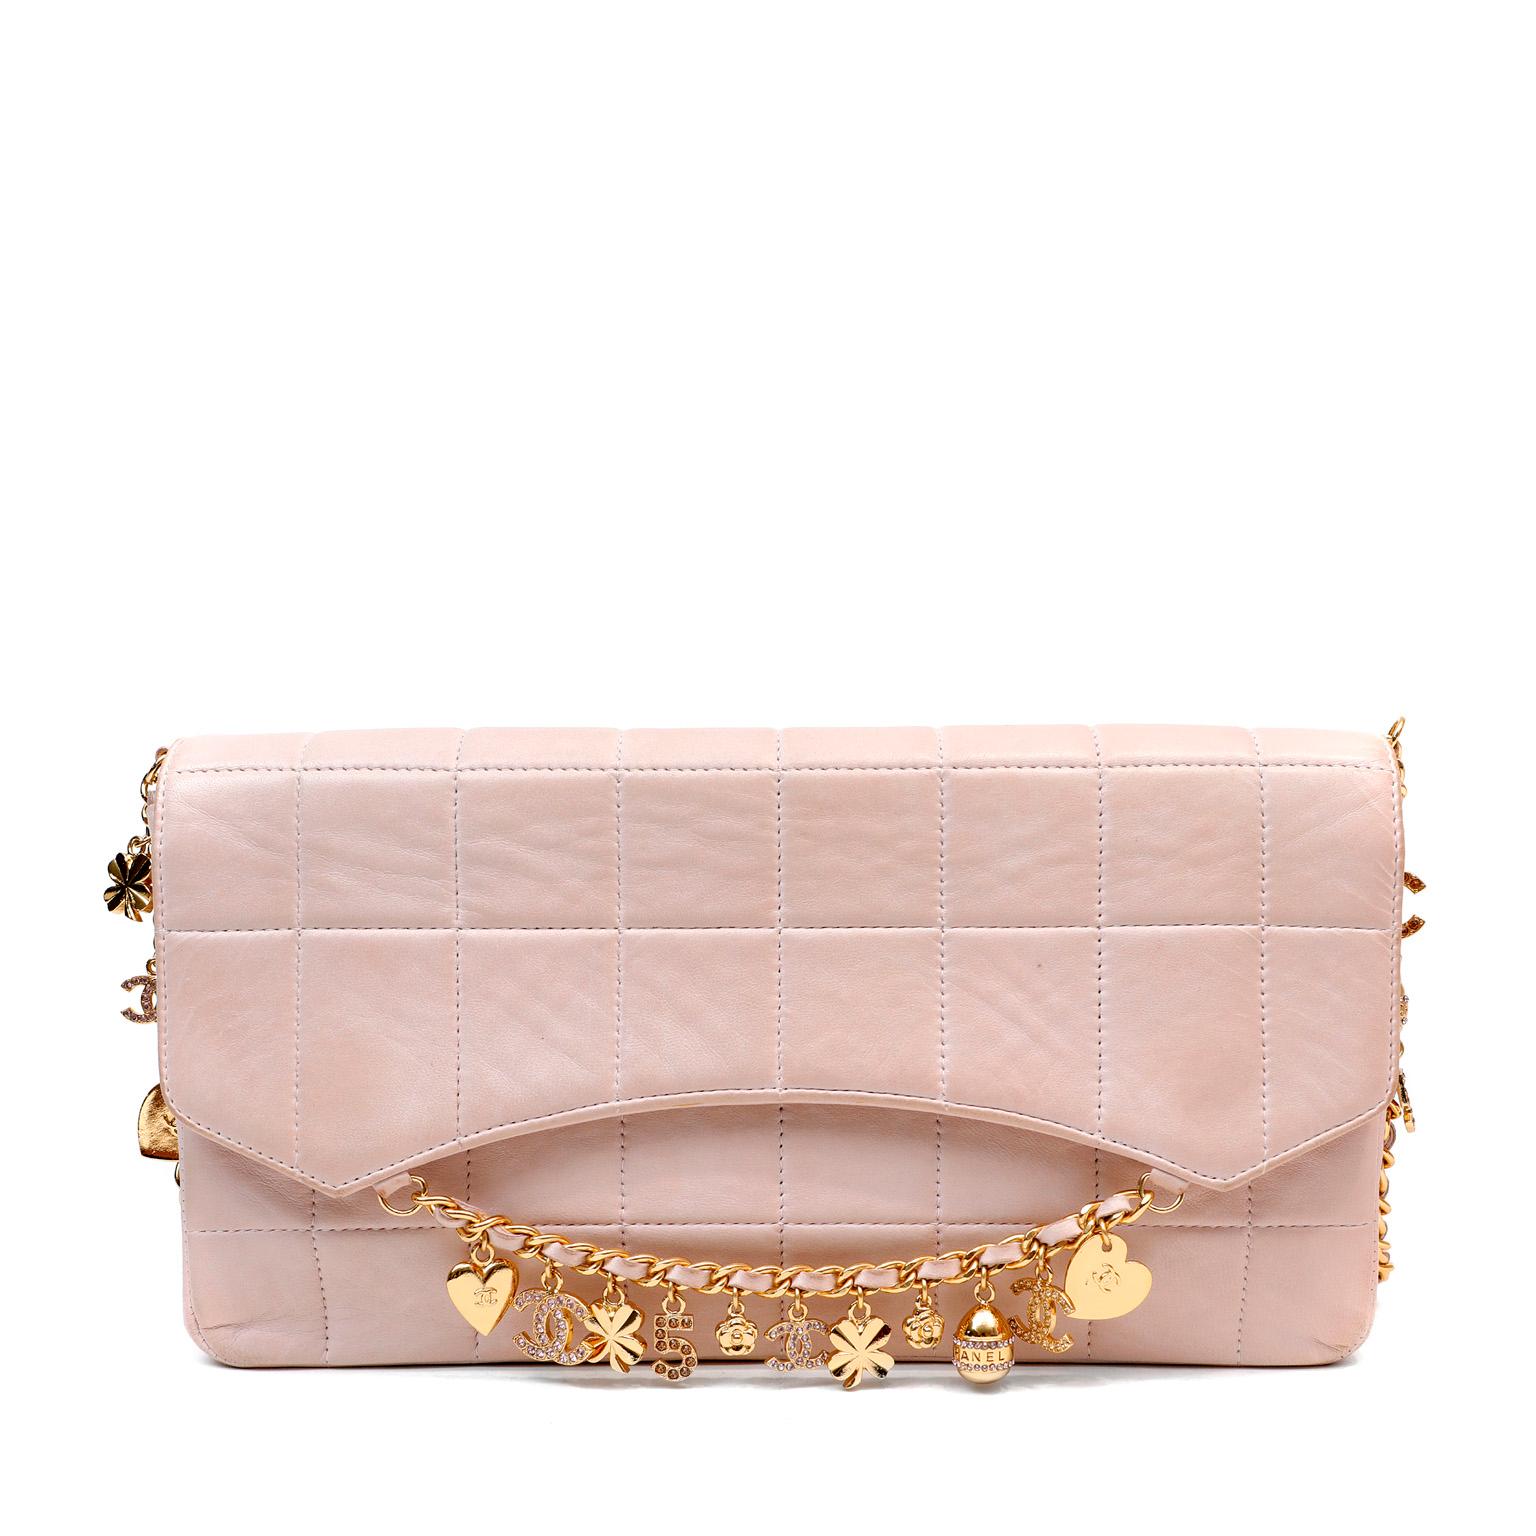 This authentic Chanel Blush Lambskin Lucky Charms Chain Flap Bag is in pristine condition.  A beautiful and feminine design, this collectible bag features iconic Chanel symbols that dangle decoratively from both the flap and strap.  Blush pink